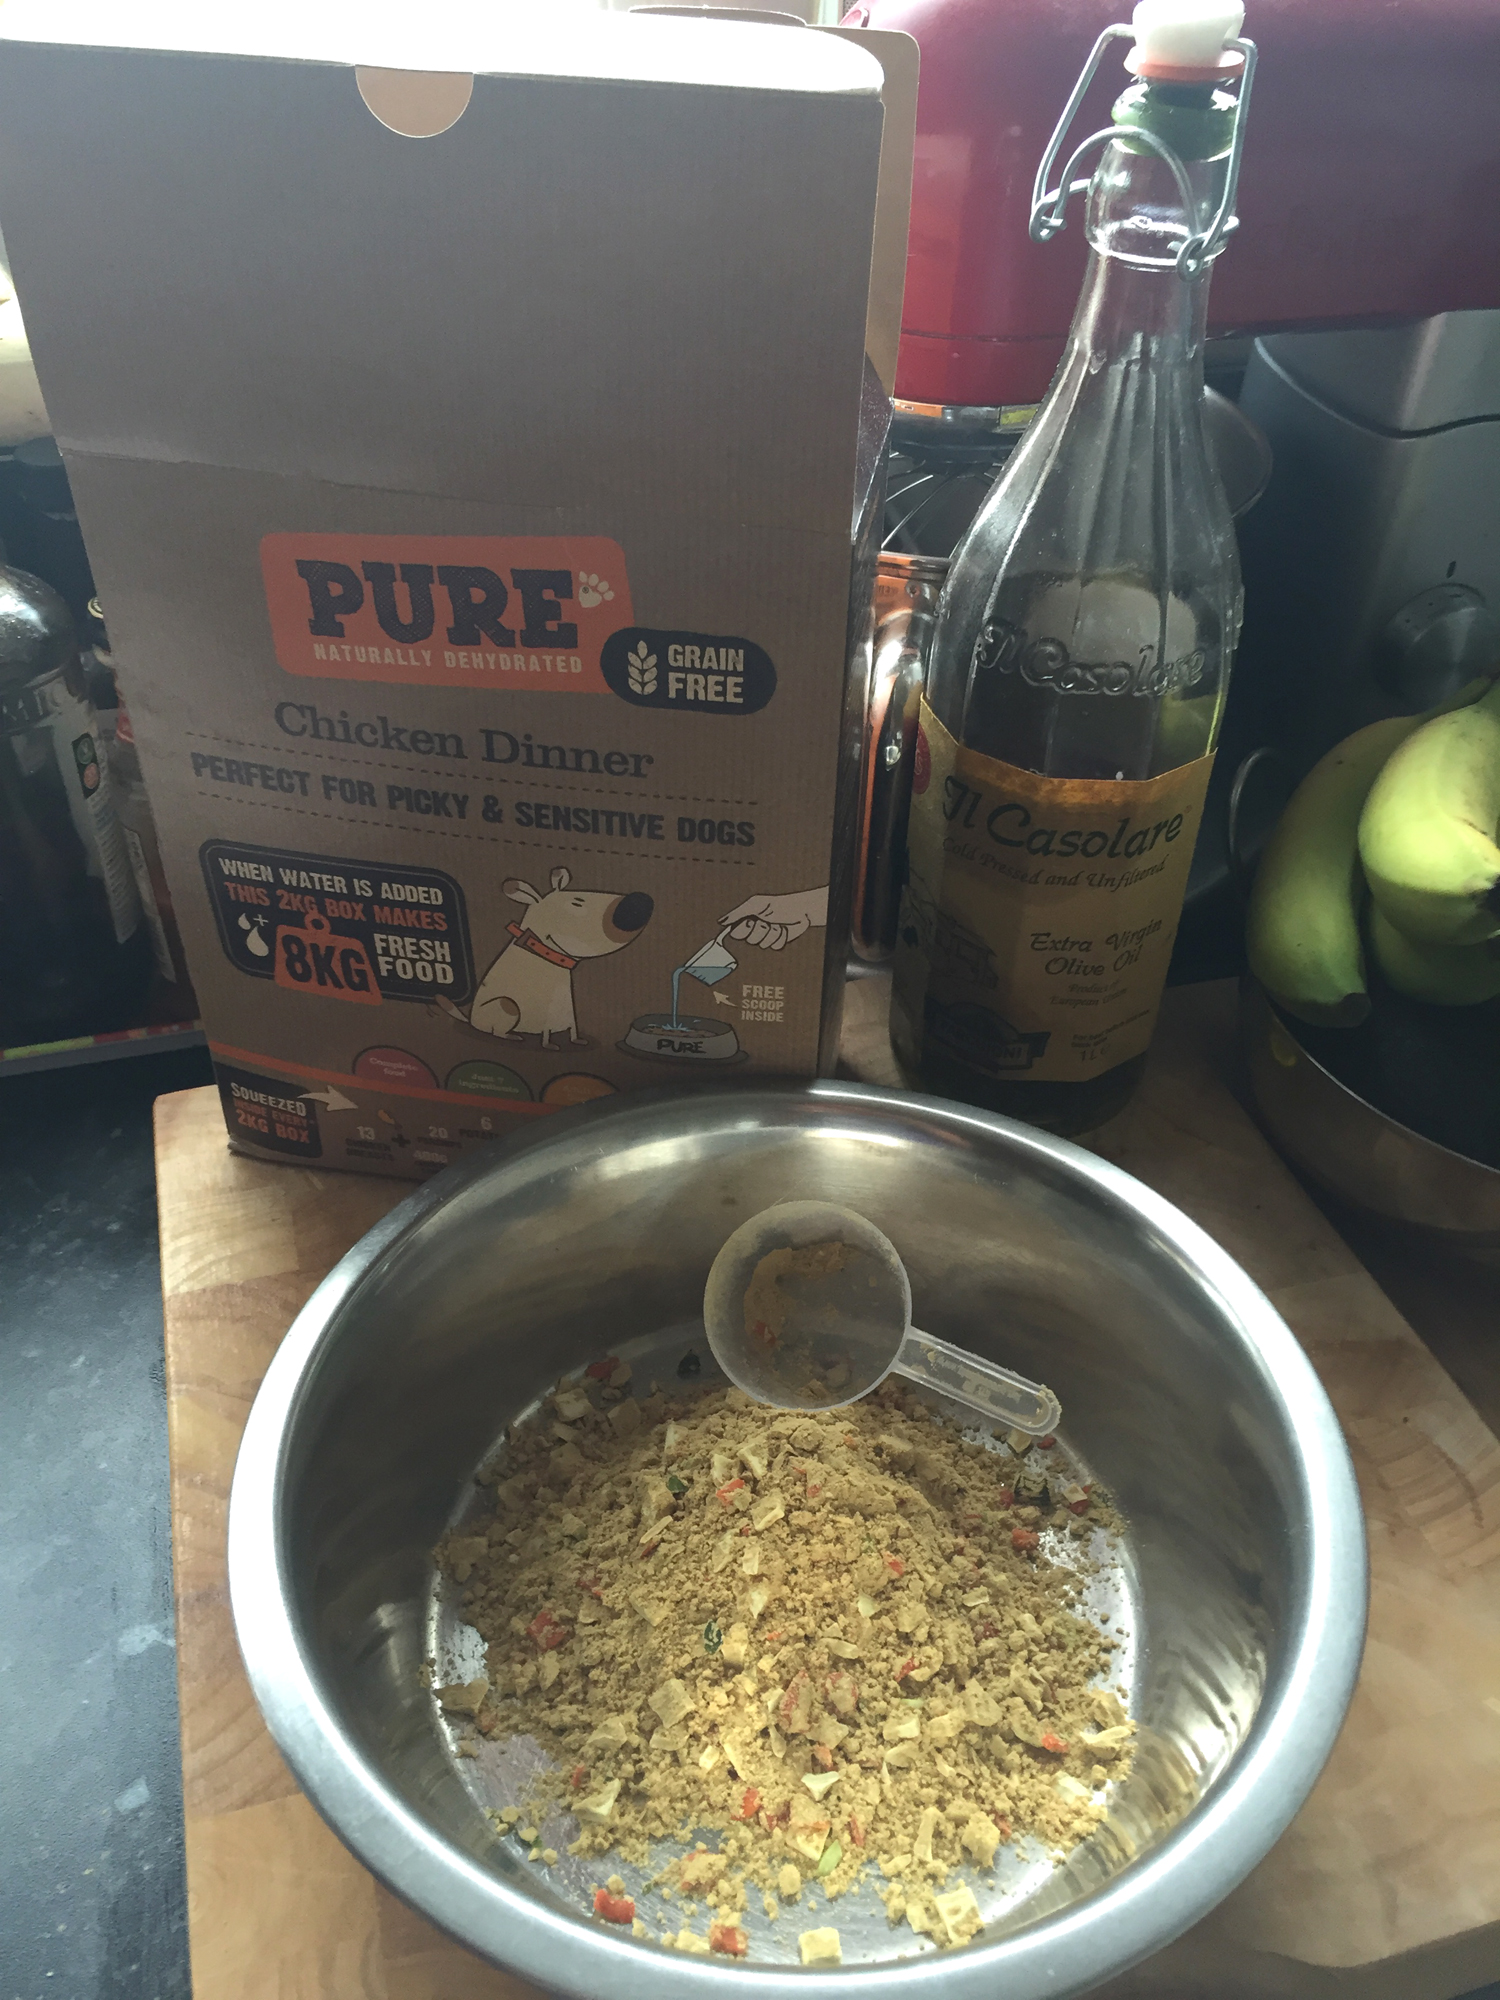 Pure chicken dinner dog food review